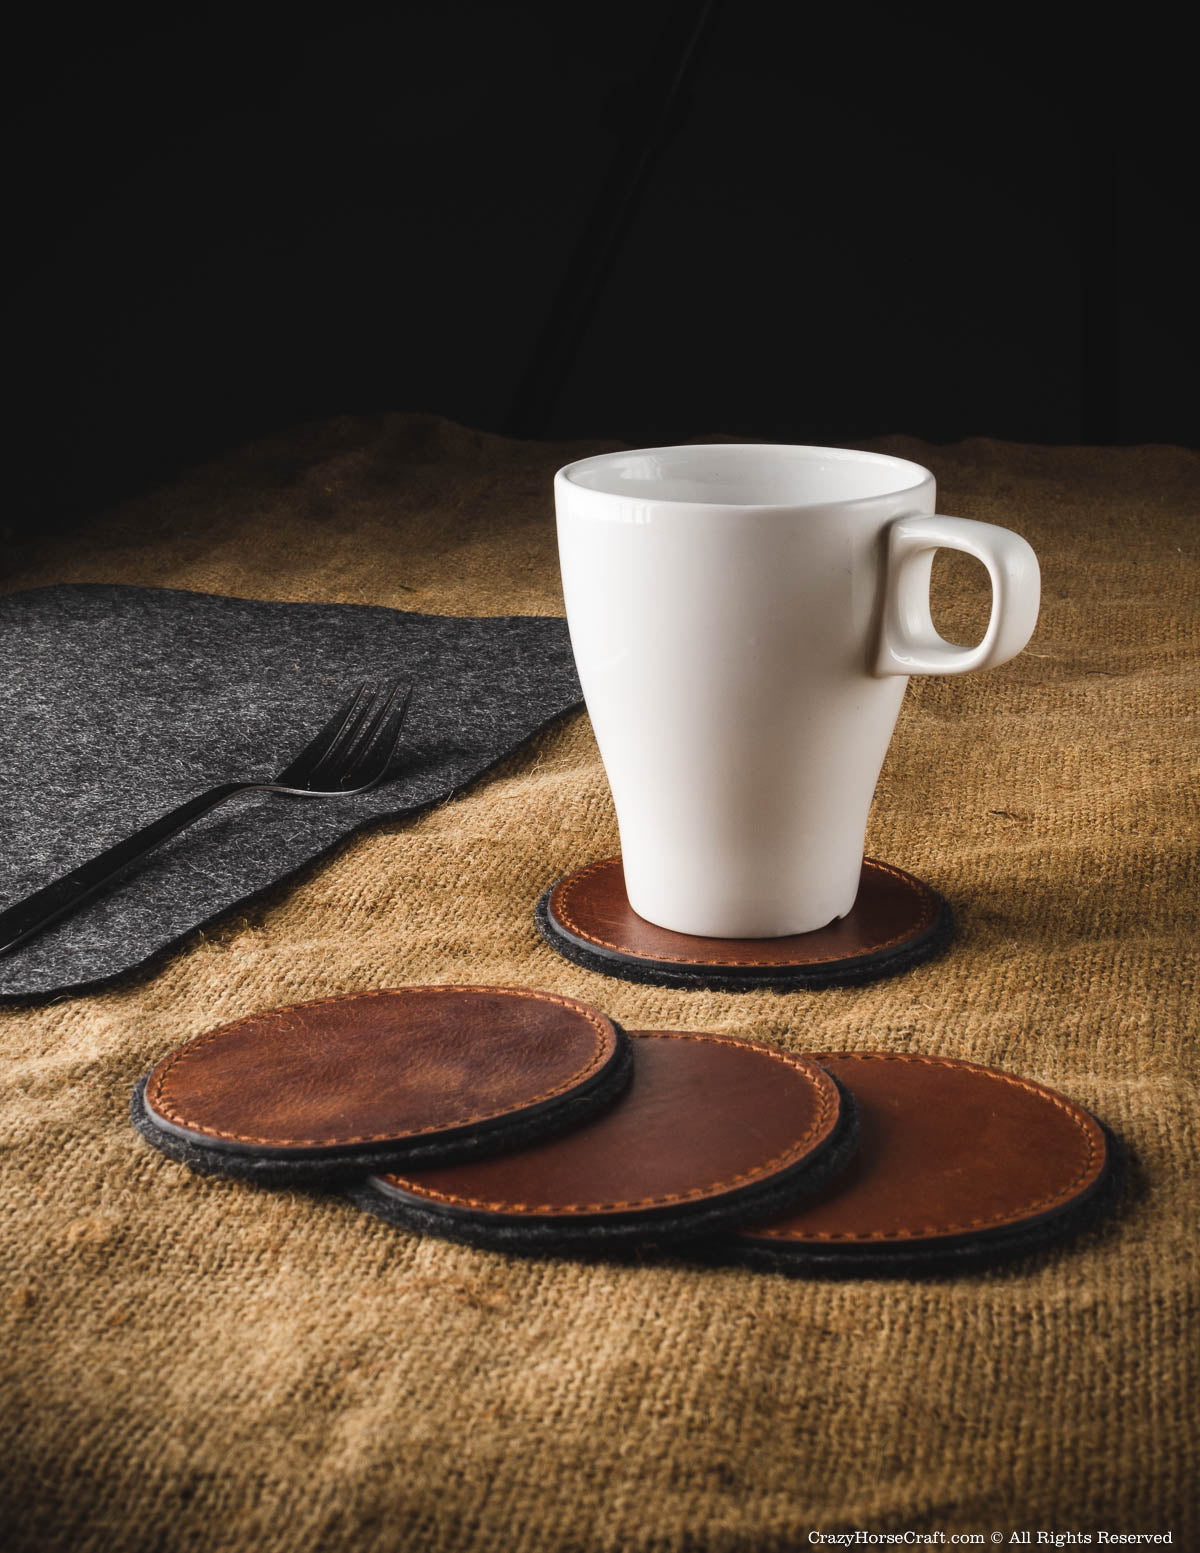 Leather Coaster Set, Water Resistant